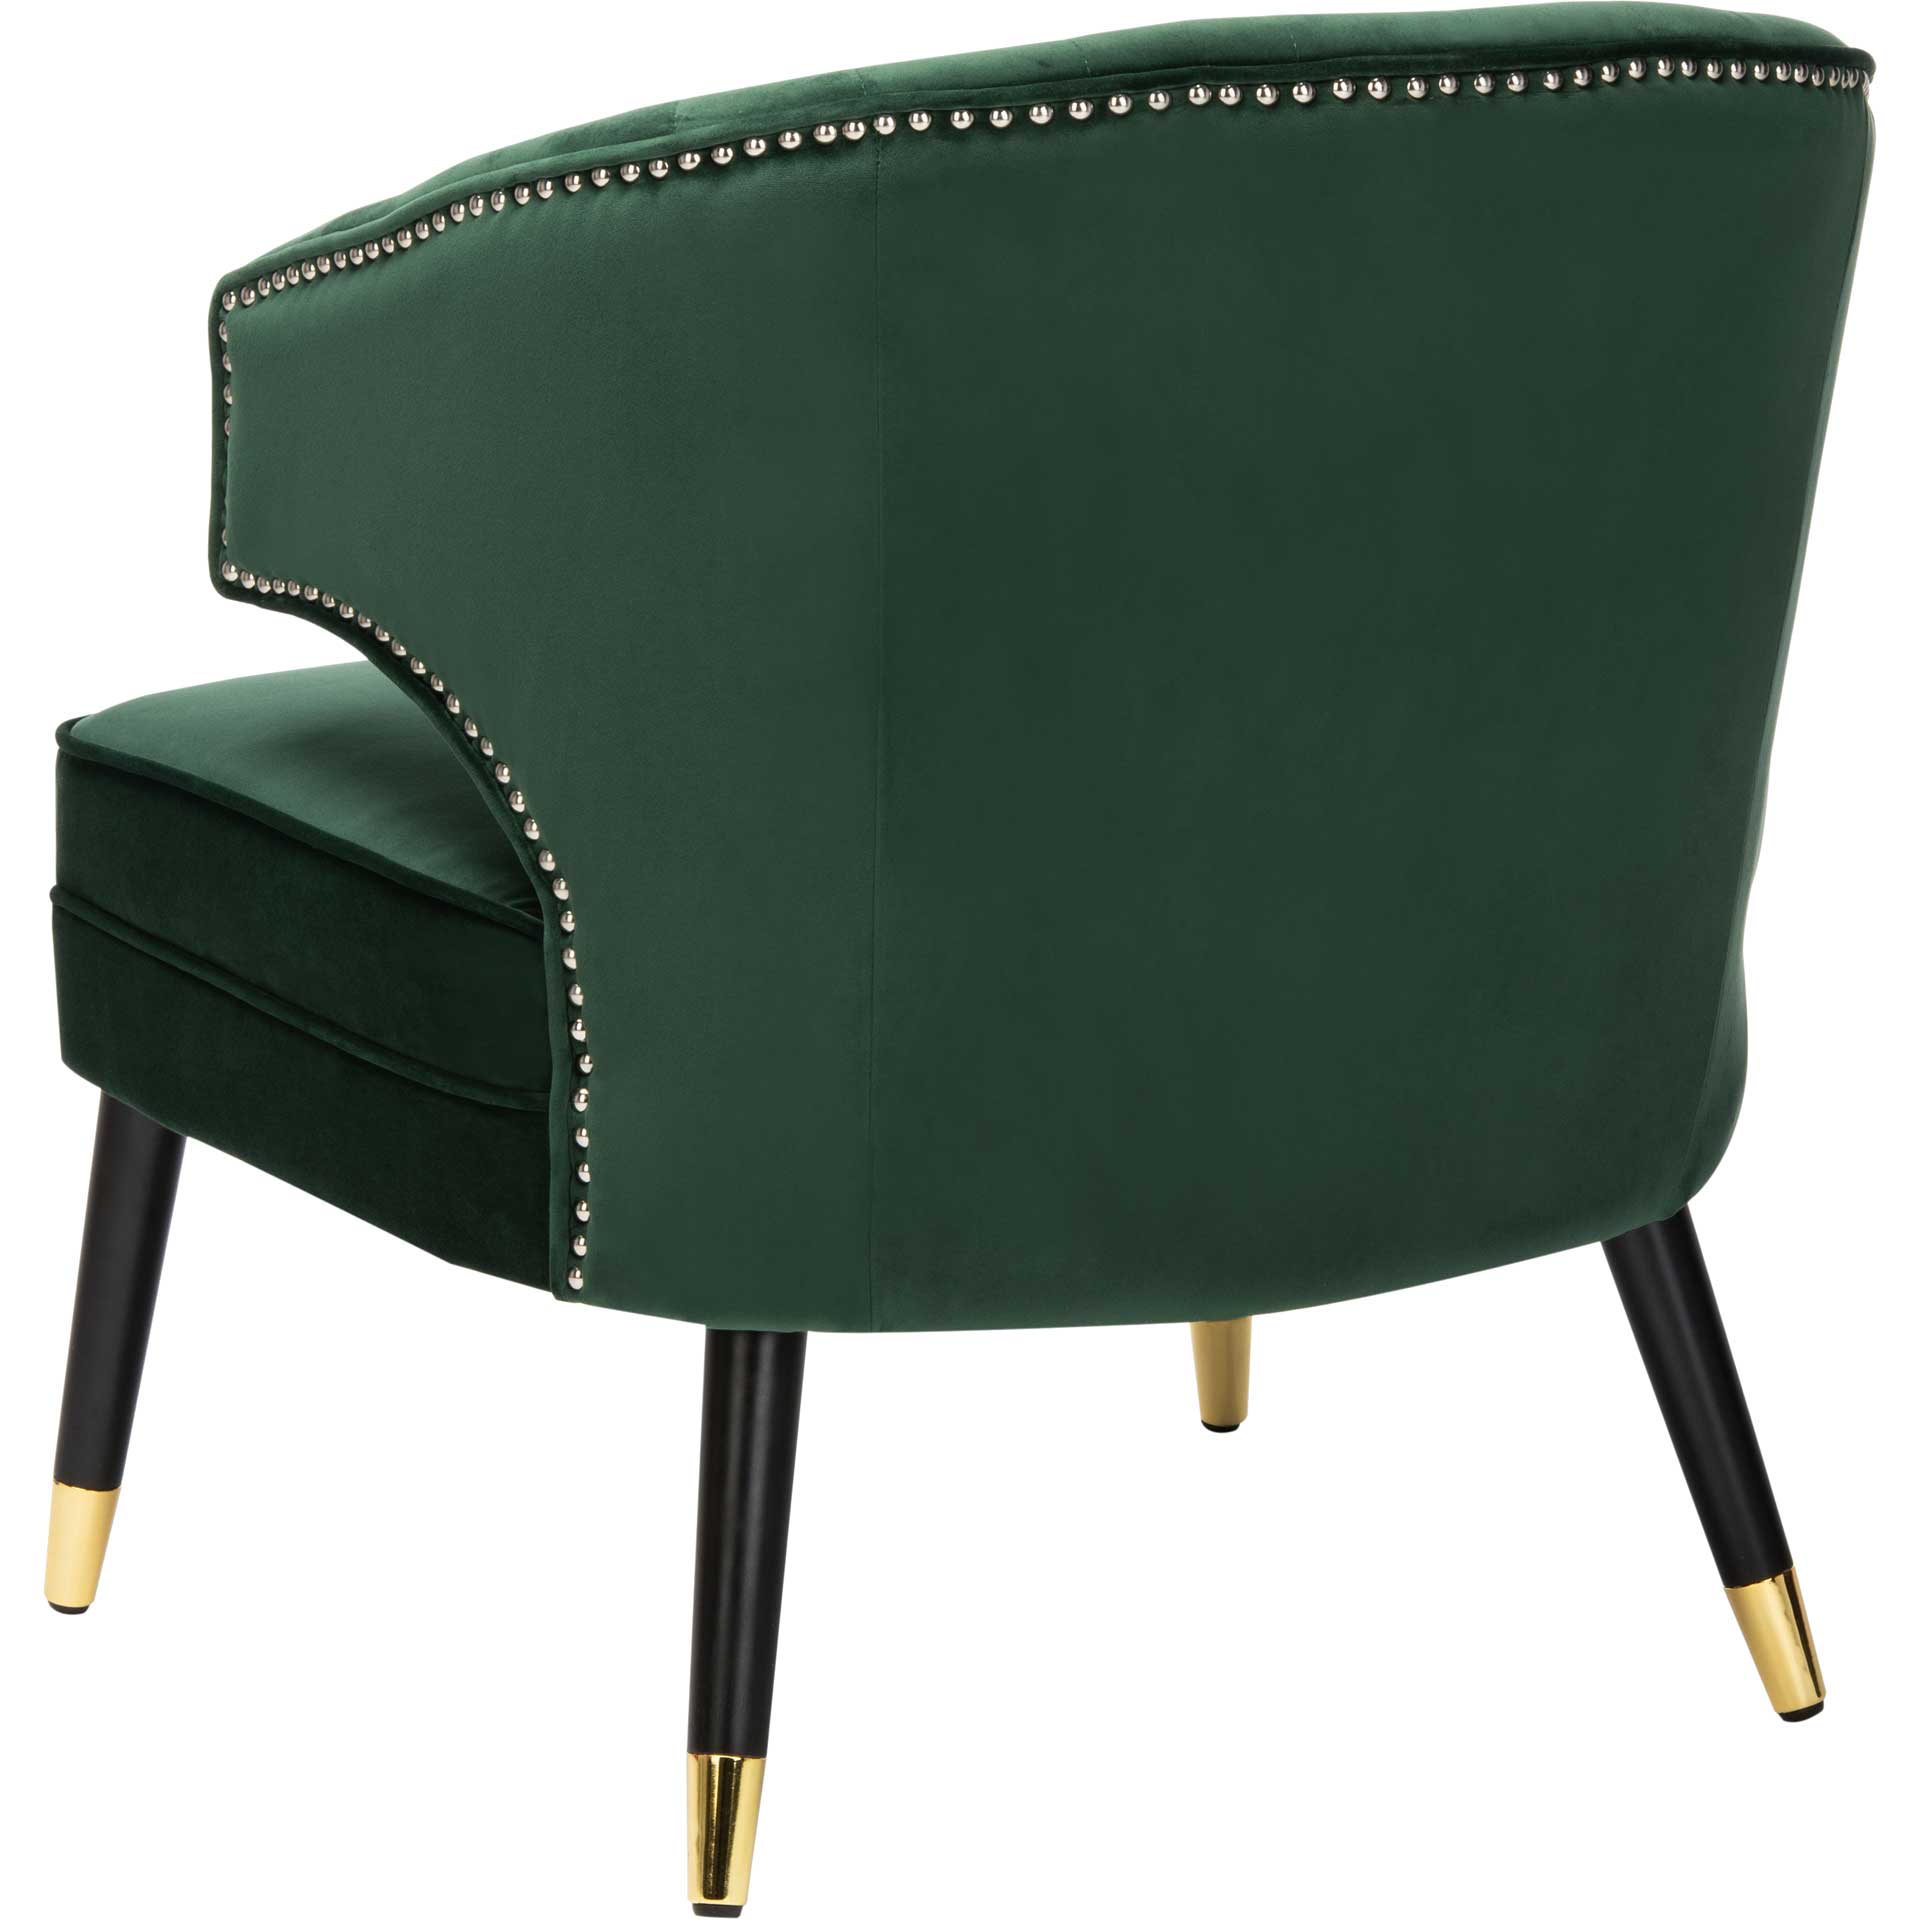 Stitch Wingback Accent Chair Forest Green/Black